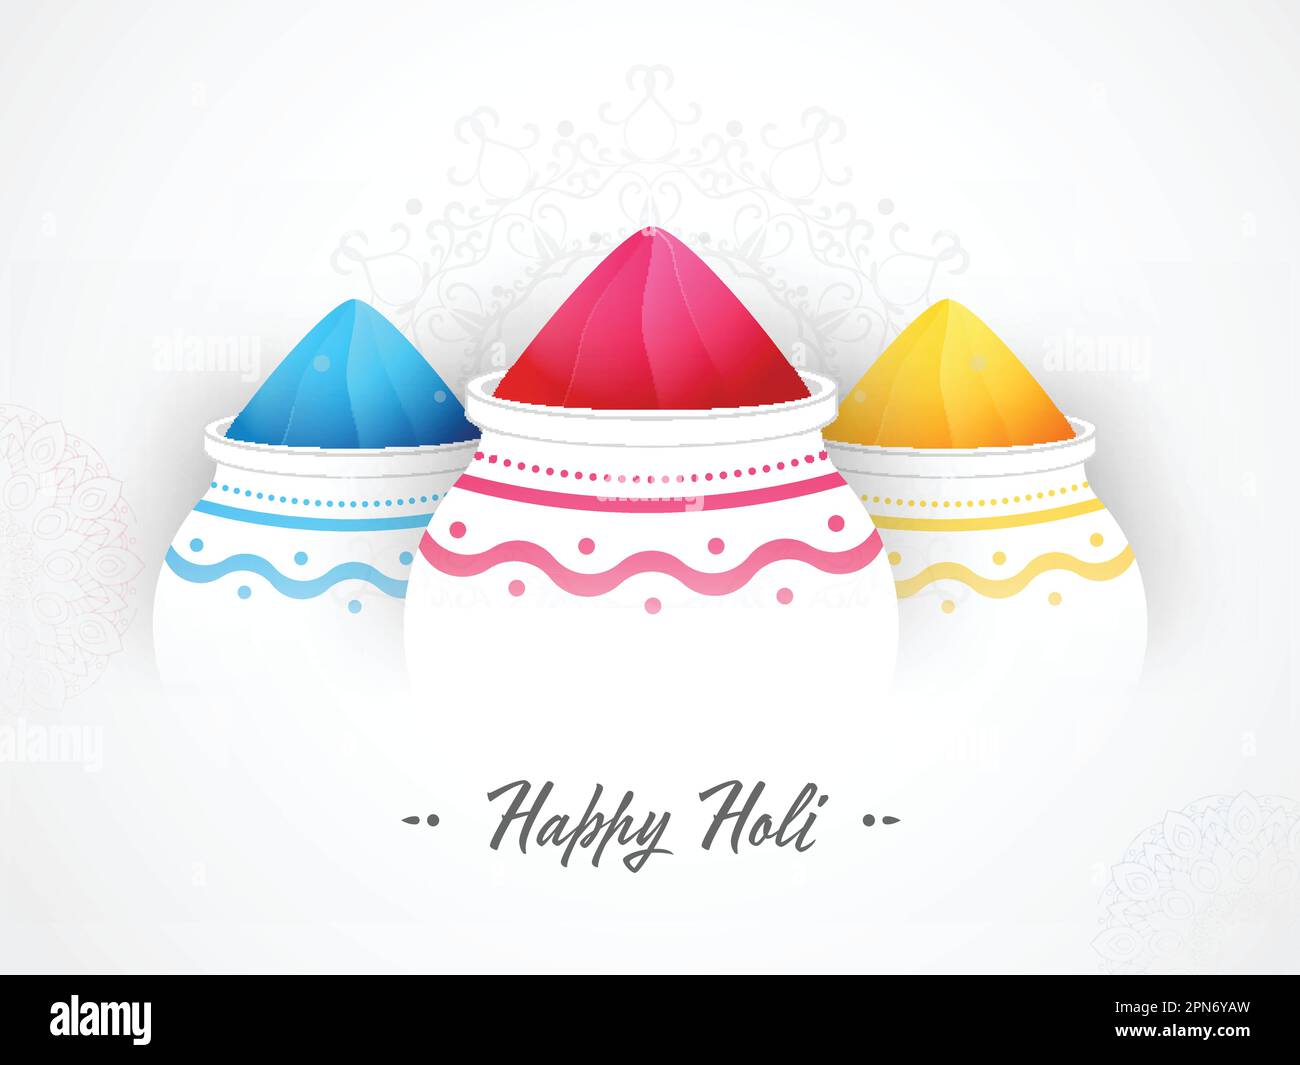 Colorful Holi powder in containers over white background Stock Photo - Alamy